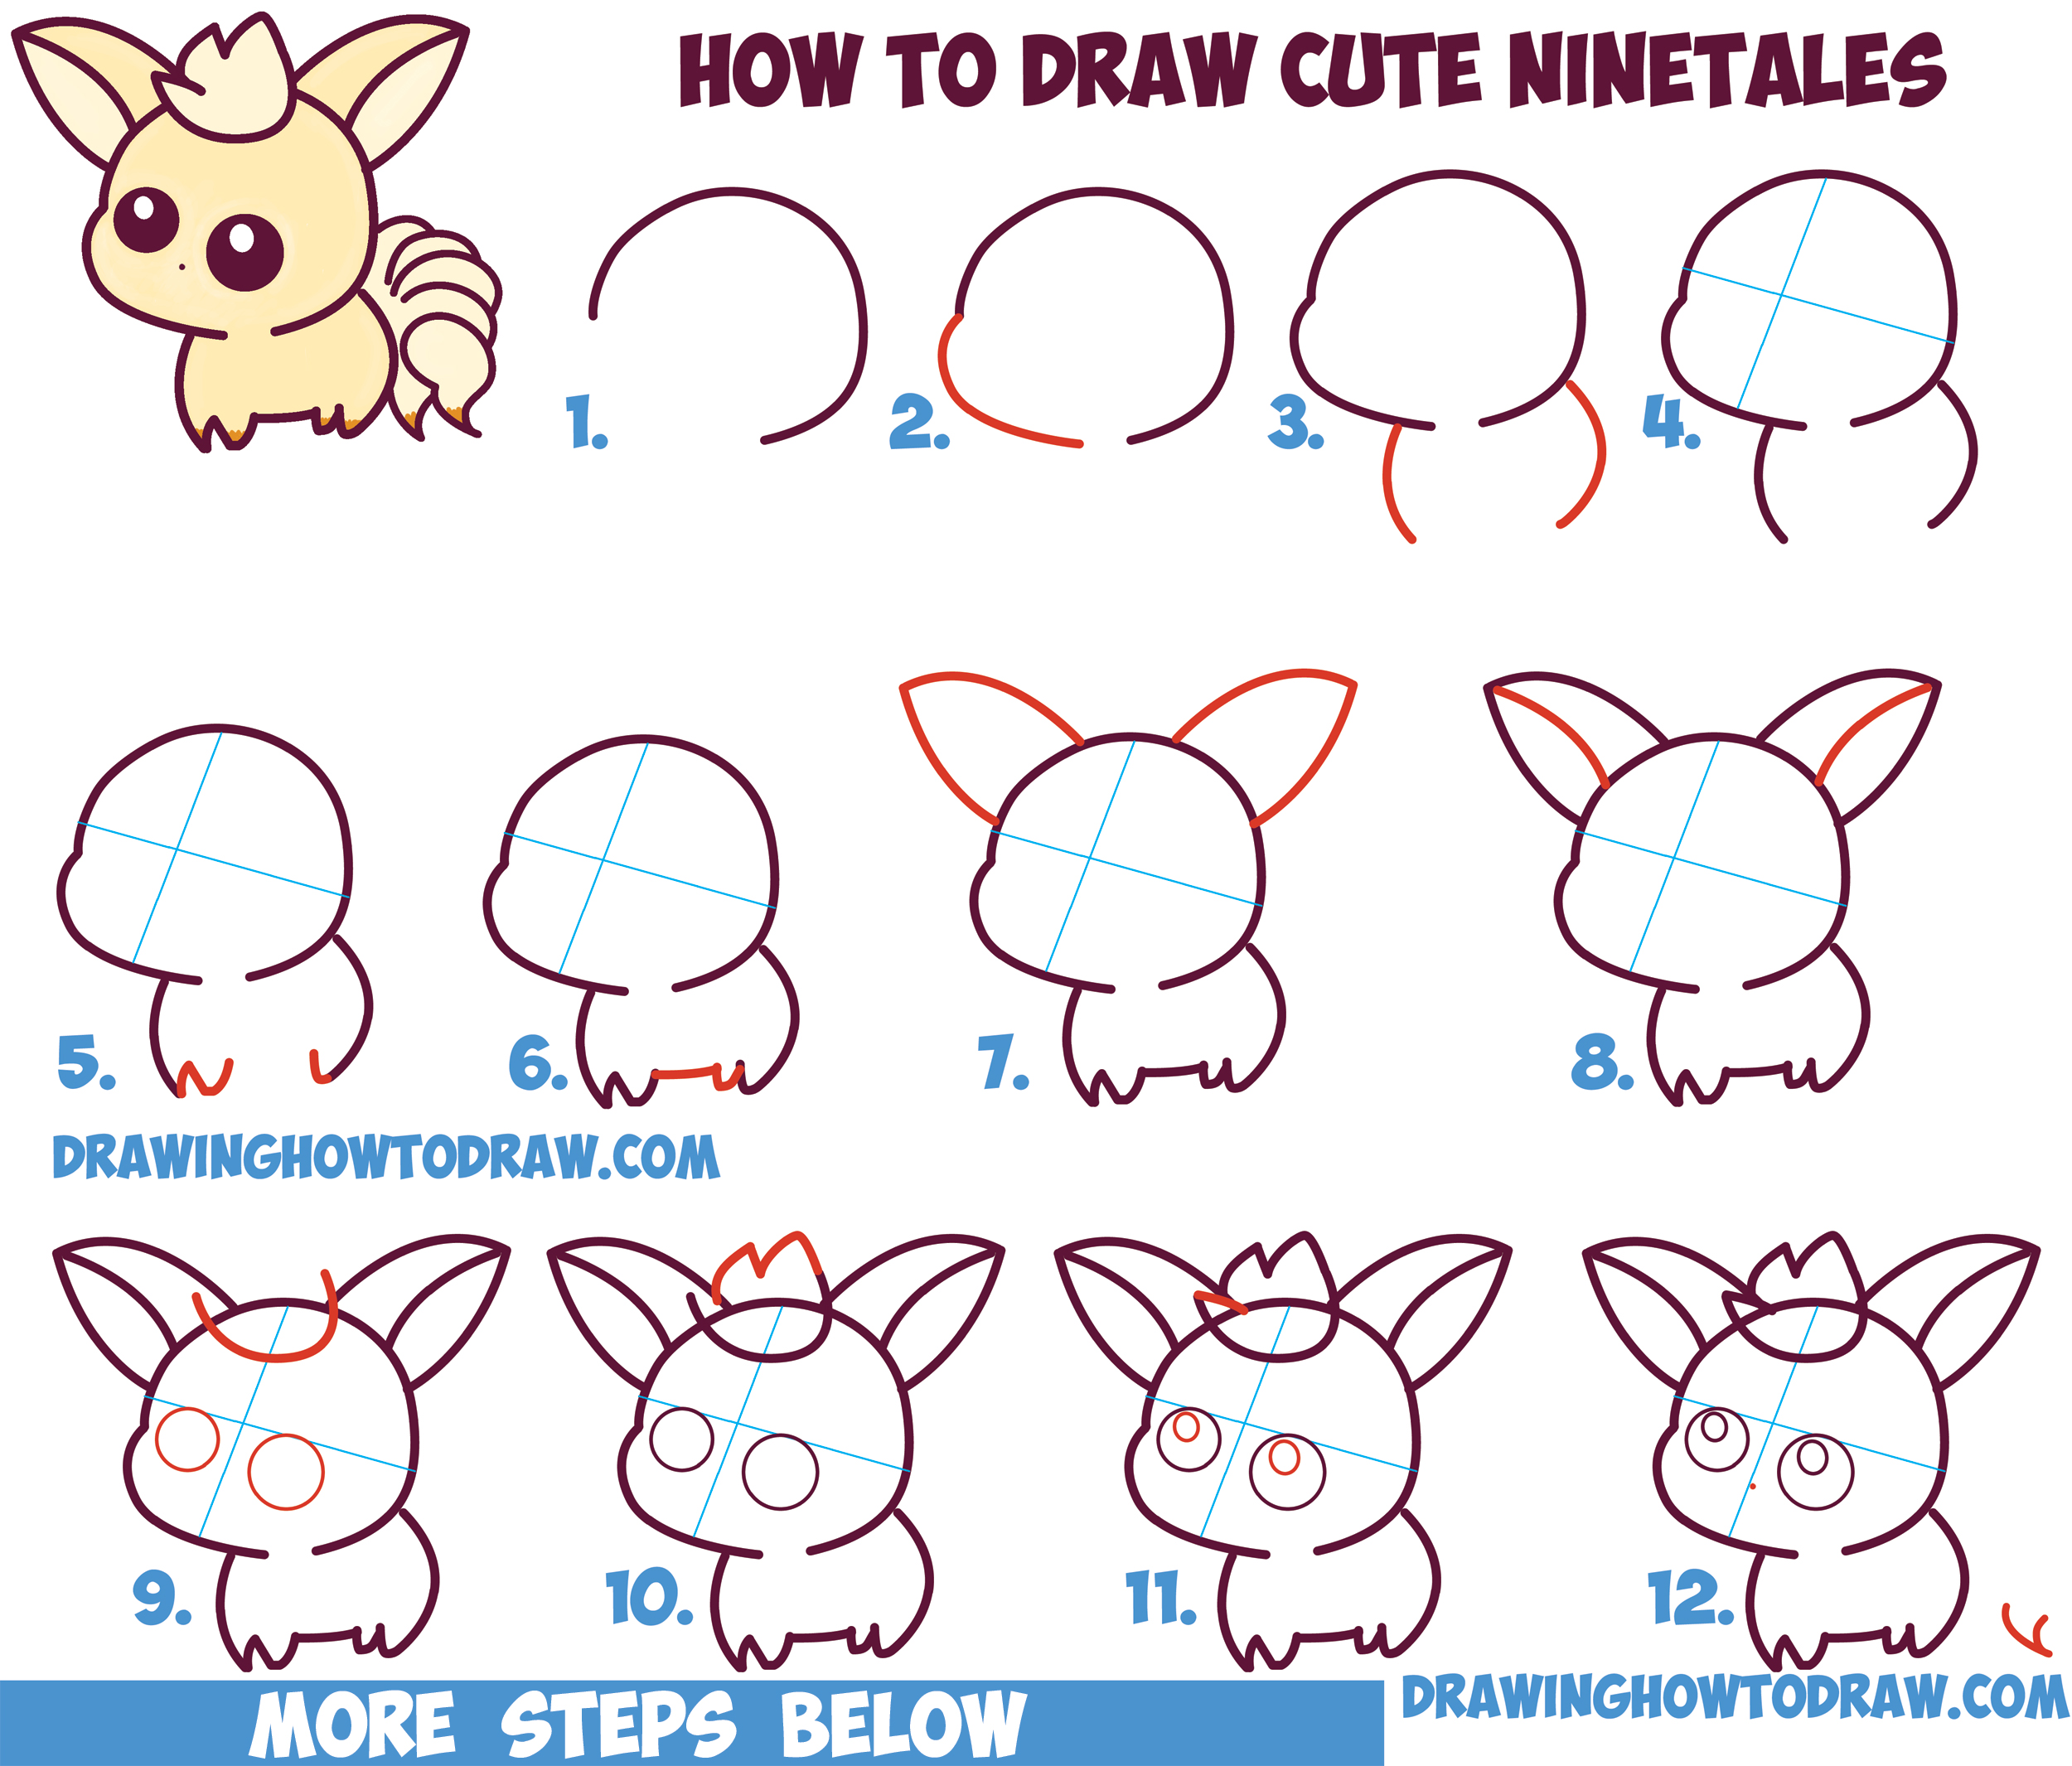 How To Draw Cute Kawaii Chibi Ninetales From Pokemon In Easy Step By Step Drawing Tutorial For Beginners How To Draw Step By Step Drawing Tutorials